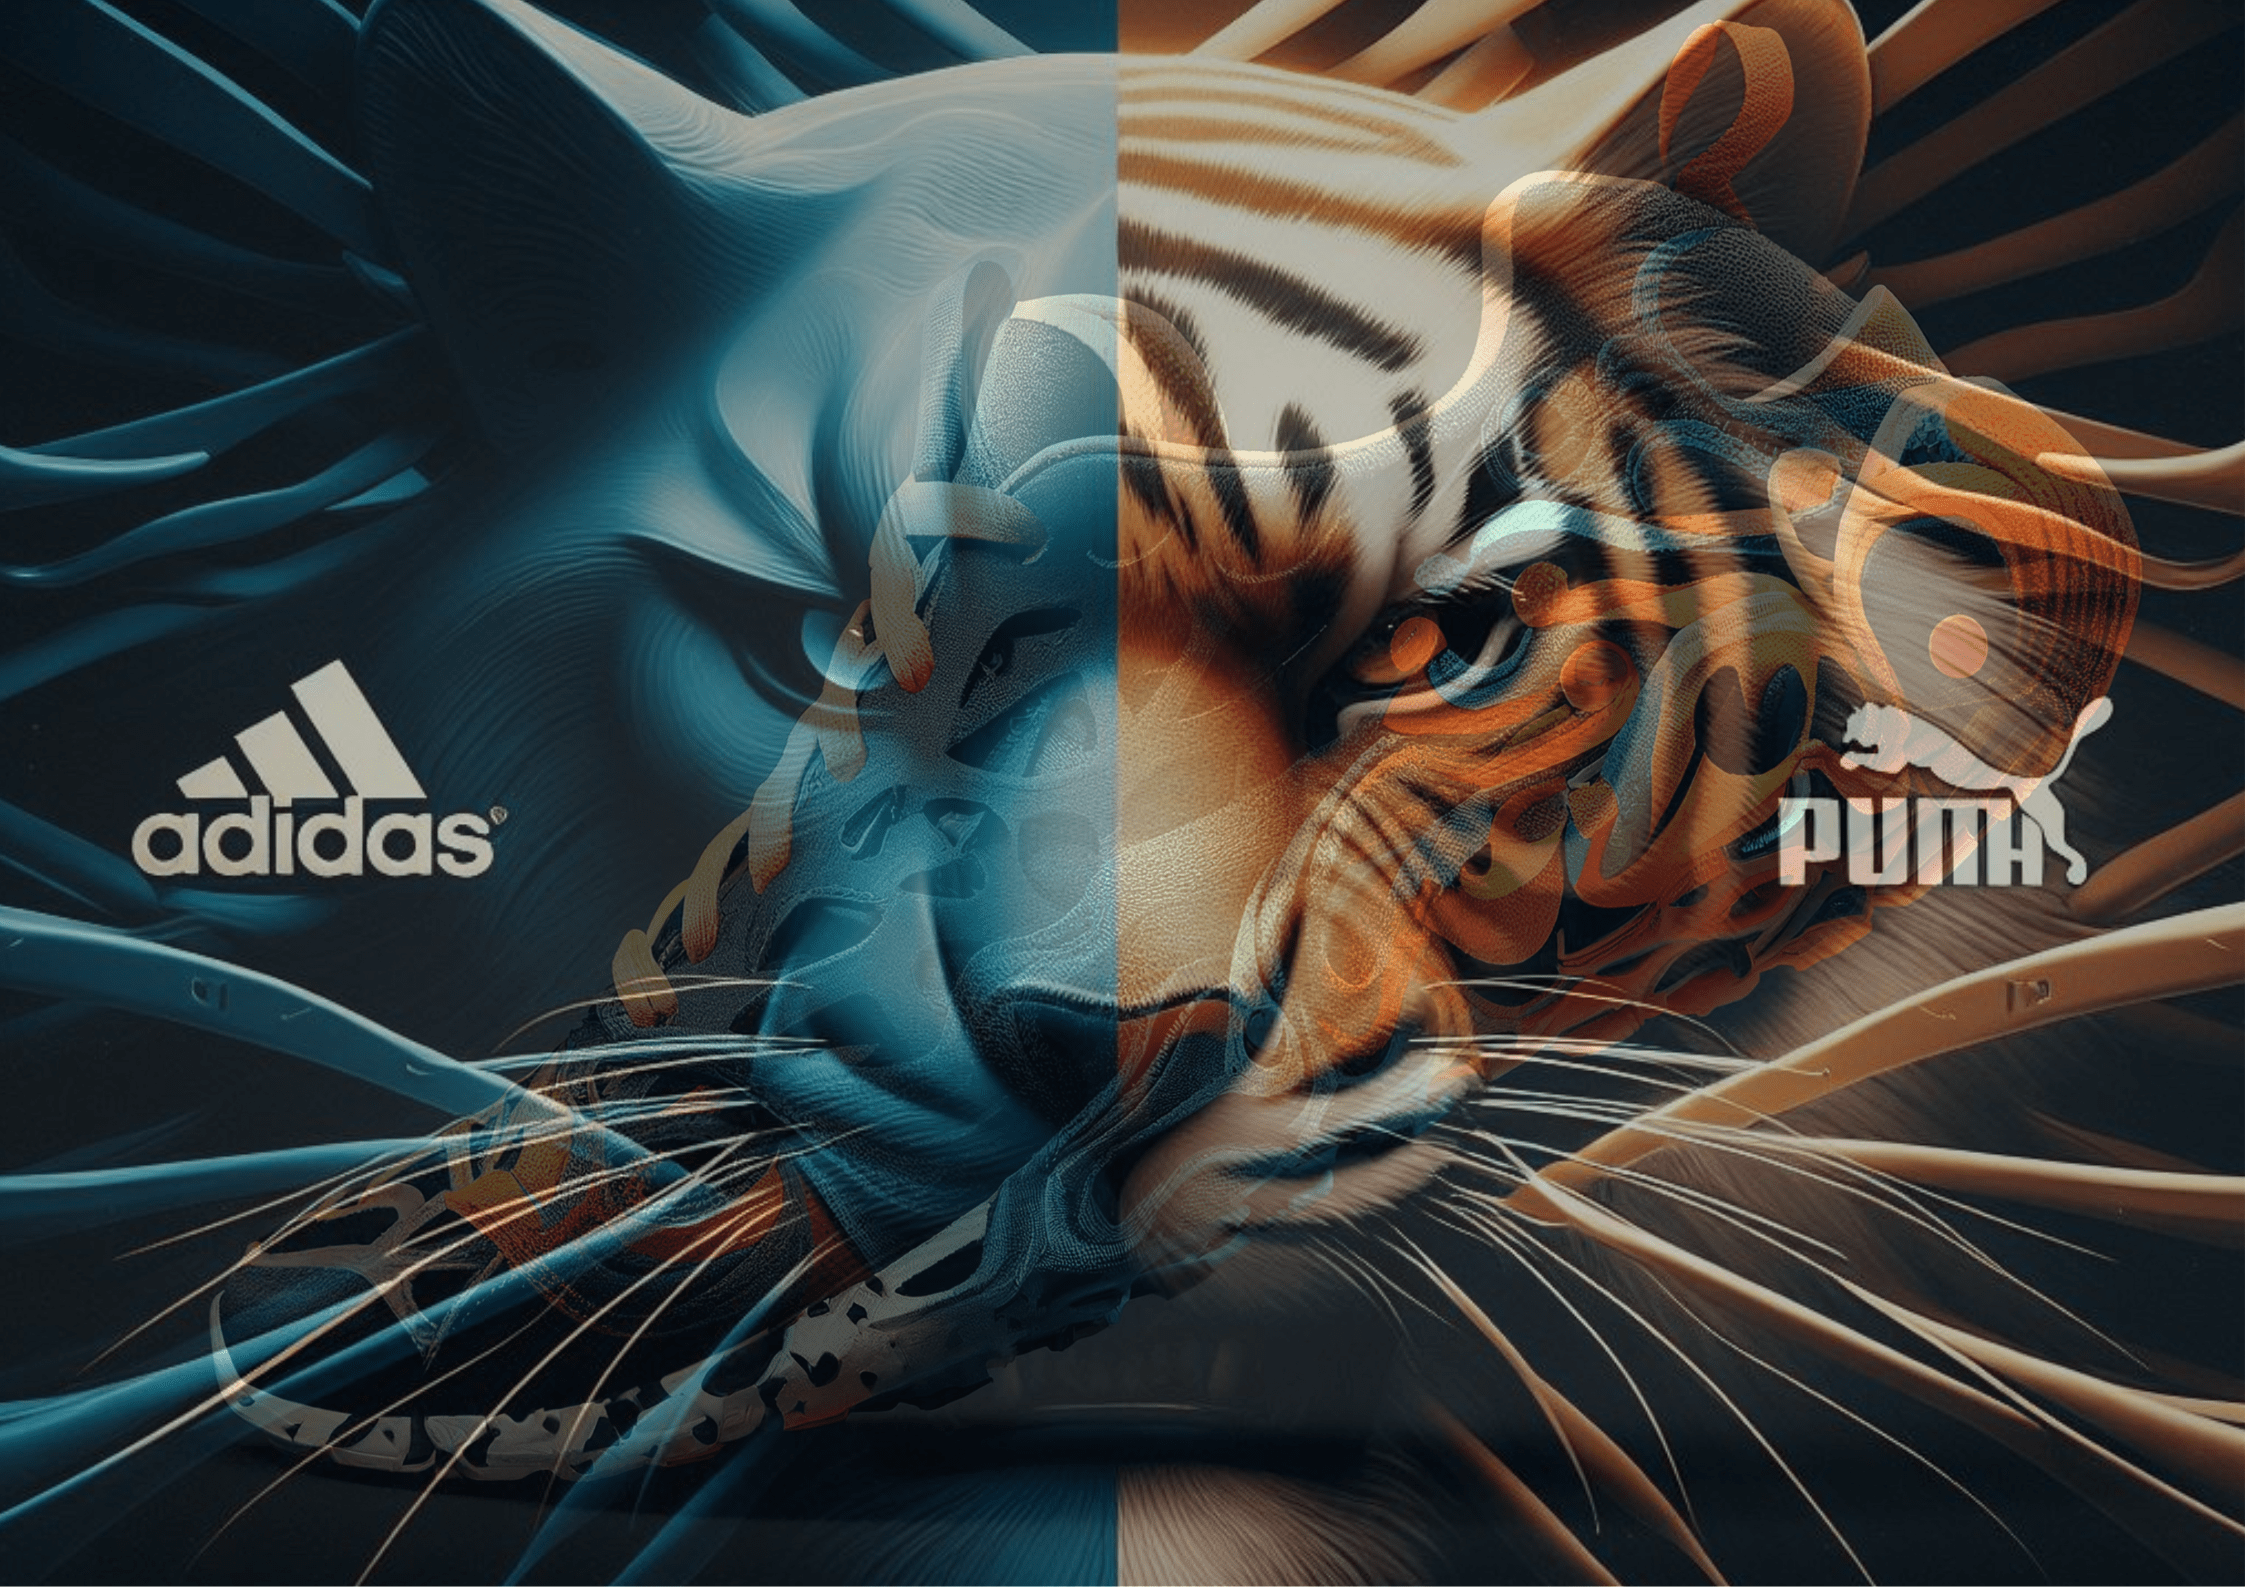 From Sibling Rivalry to Global Titans: Journey of Adidas and Puma